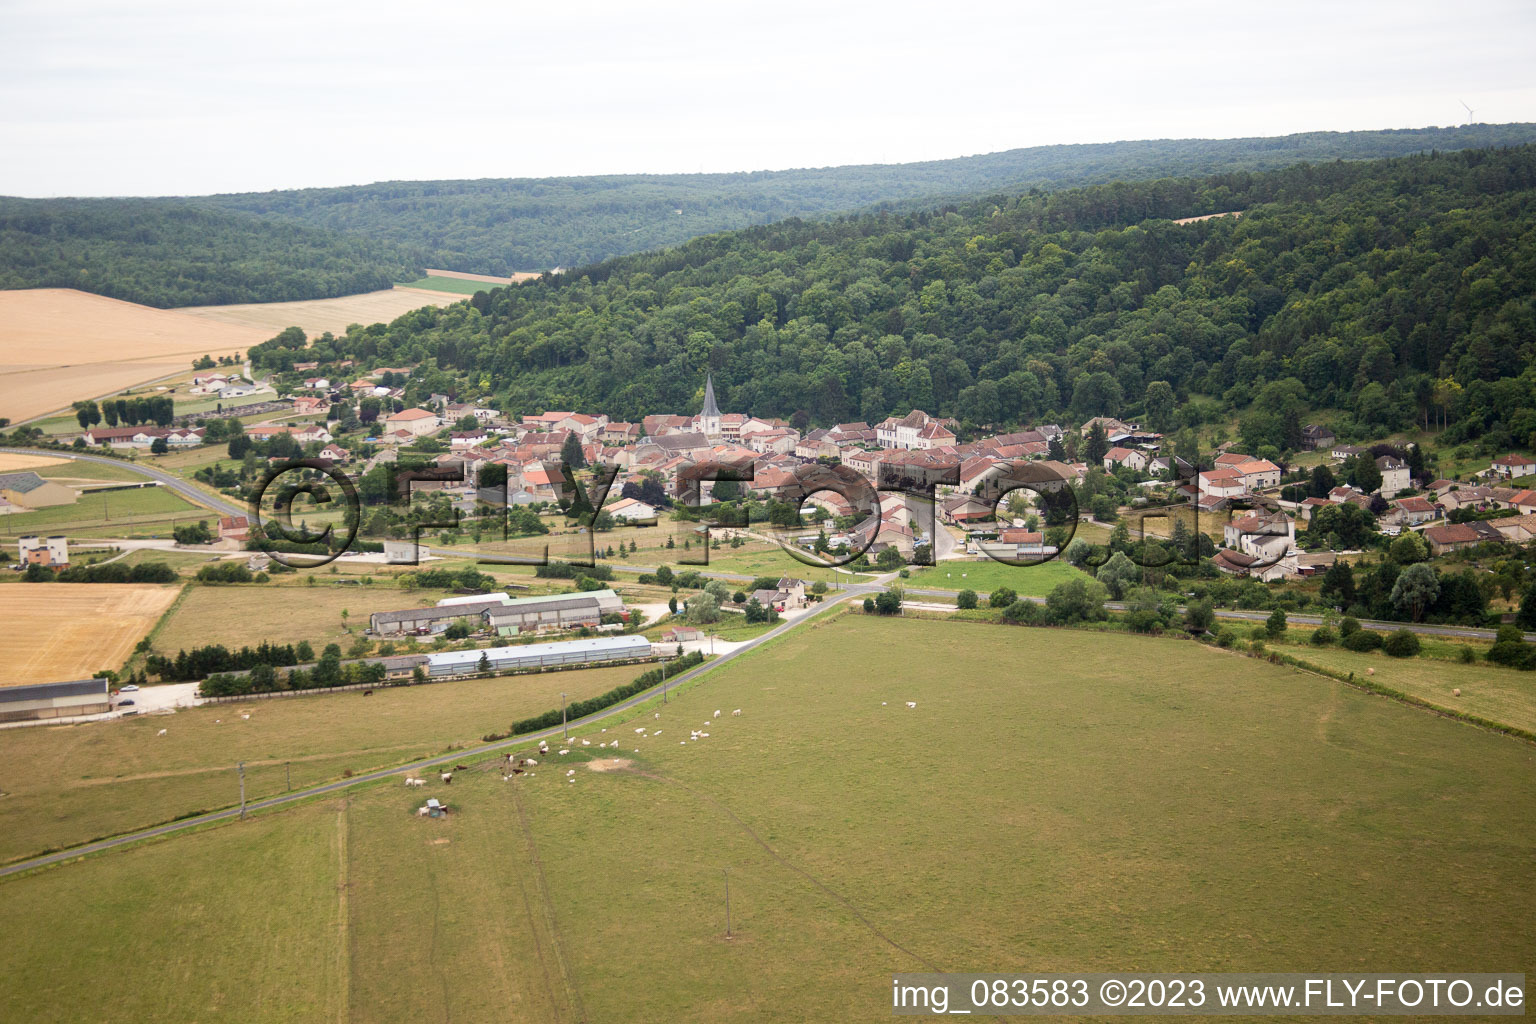 Aerial view of Maxey-sur-Vaise in the state Meuse, France